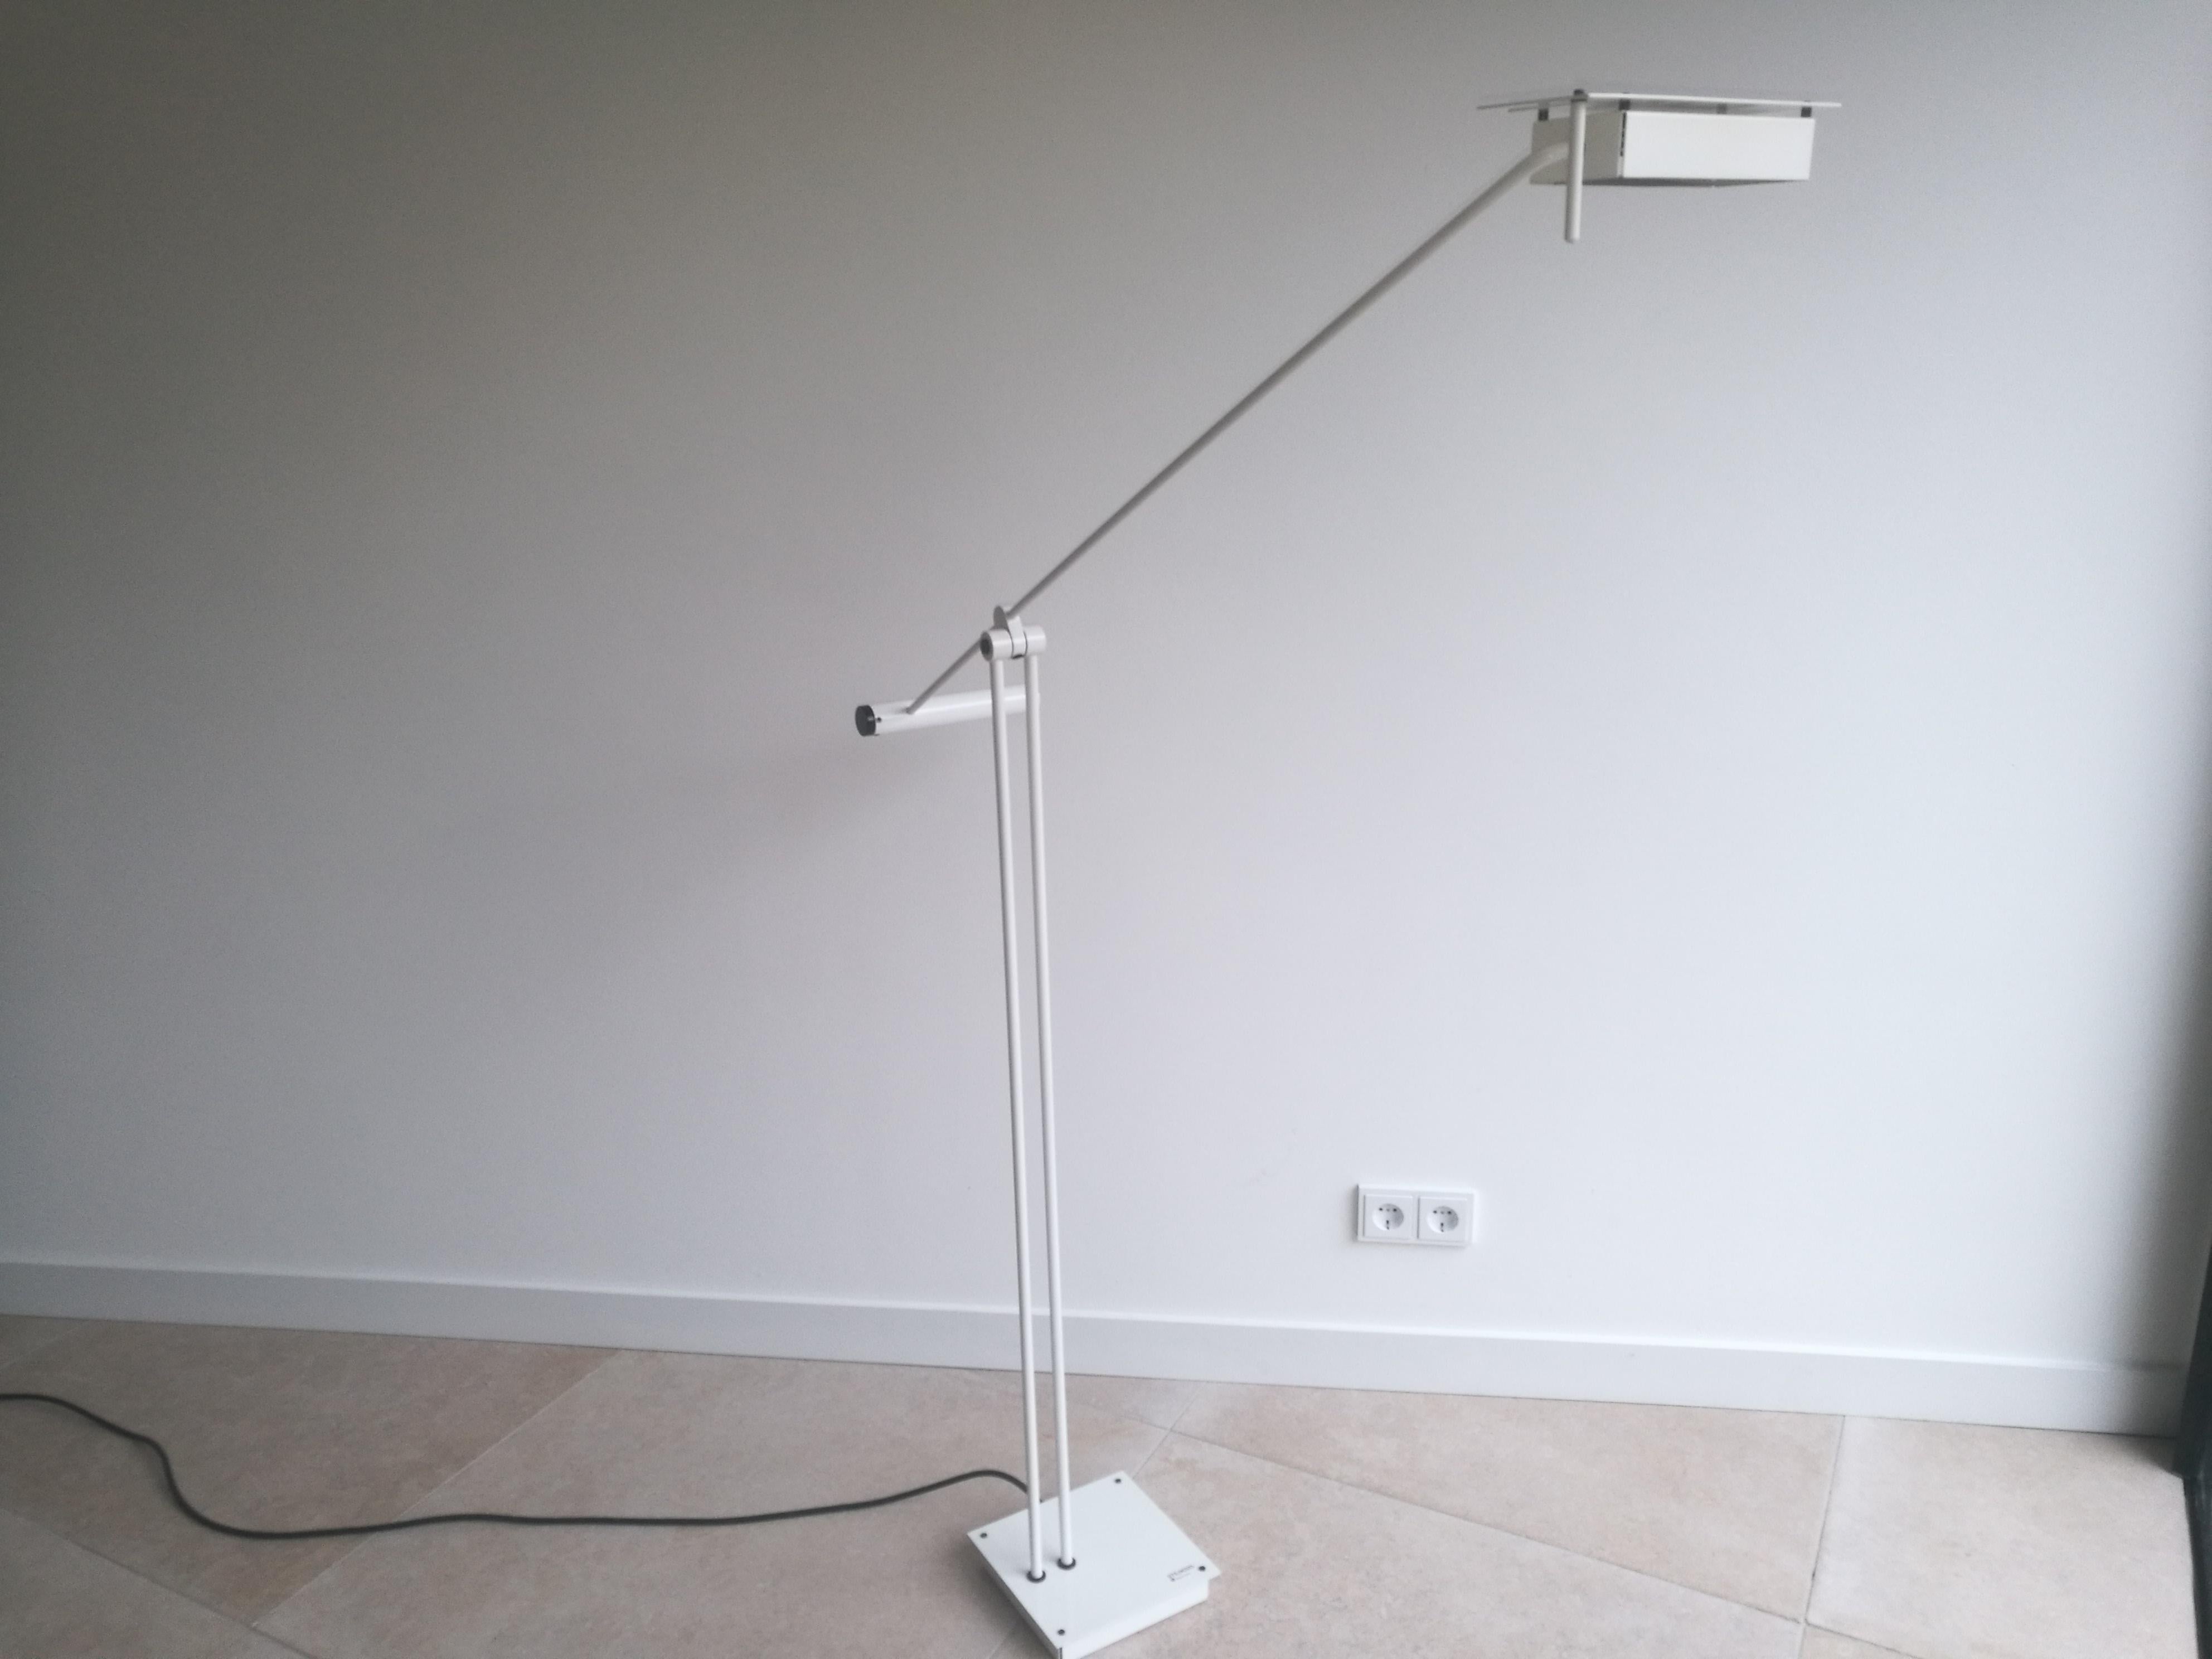 The Samurai floor lamp is designed by Japanese Designer Sigheaki Asahara for Stilnovo in the early 1980s. The height of this halogen lamp is adjustable with a maximum height of 2 meters. The dimmer is subtly incorporated in the counter